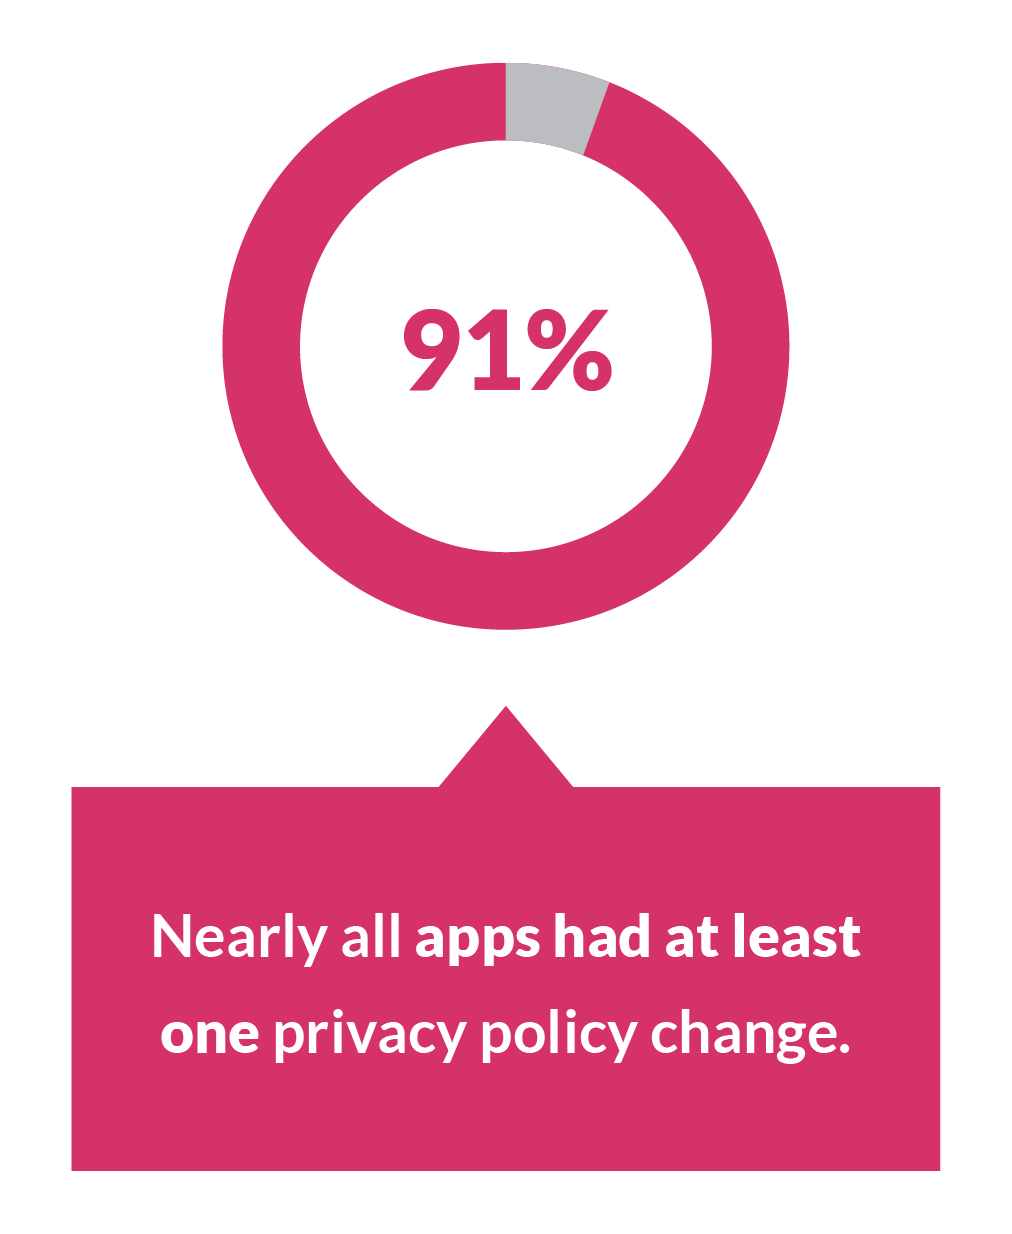 Edtech app privacy policy changes